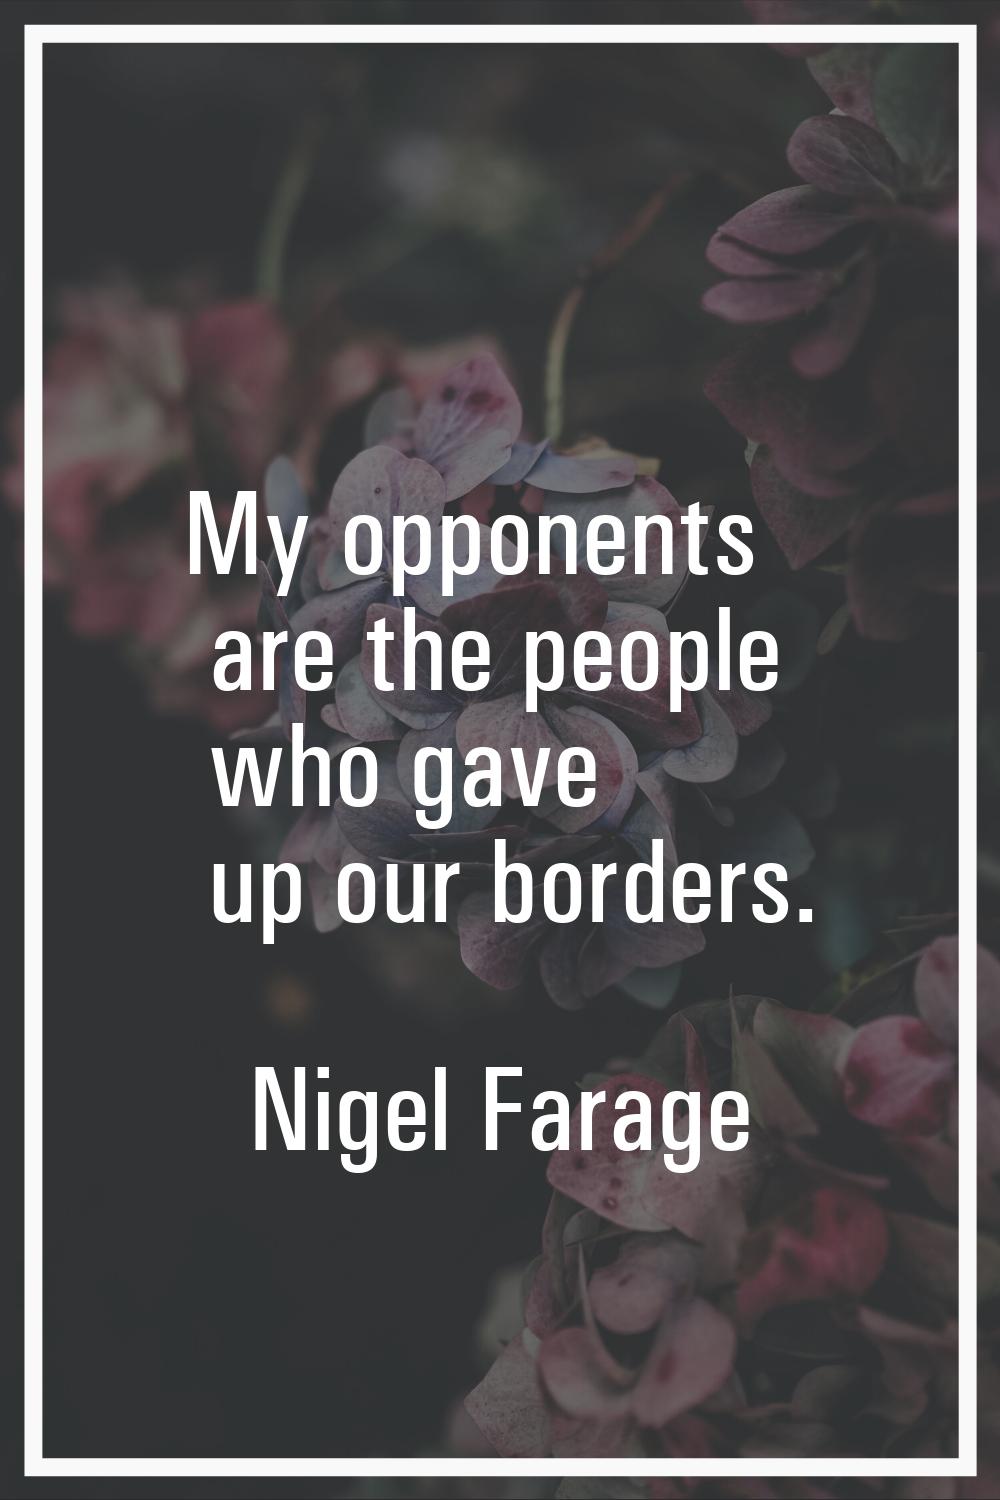 My opponents are the people who gave up our borders.